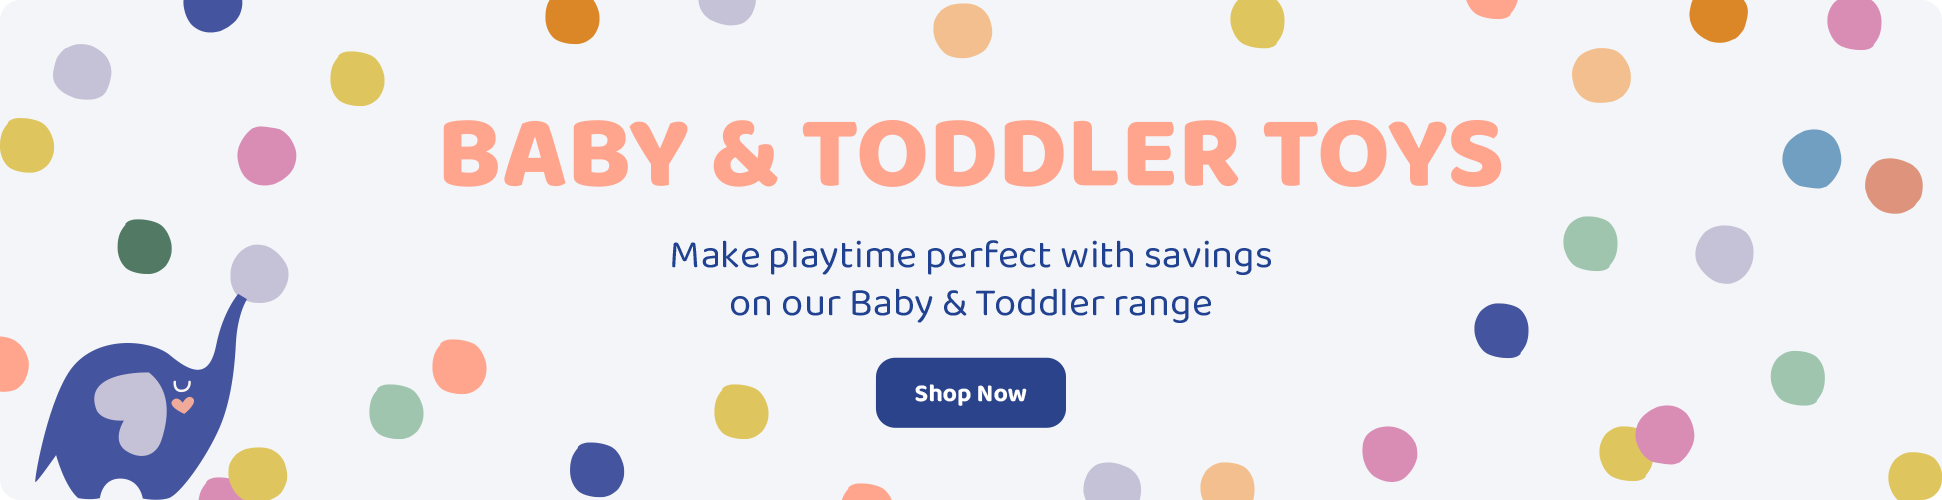 Baby & Toddler Event